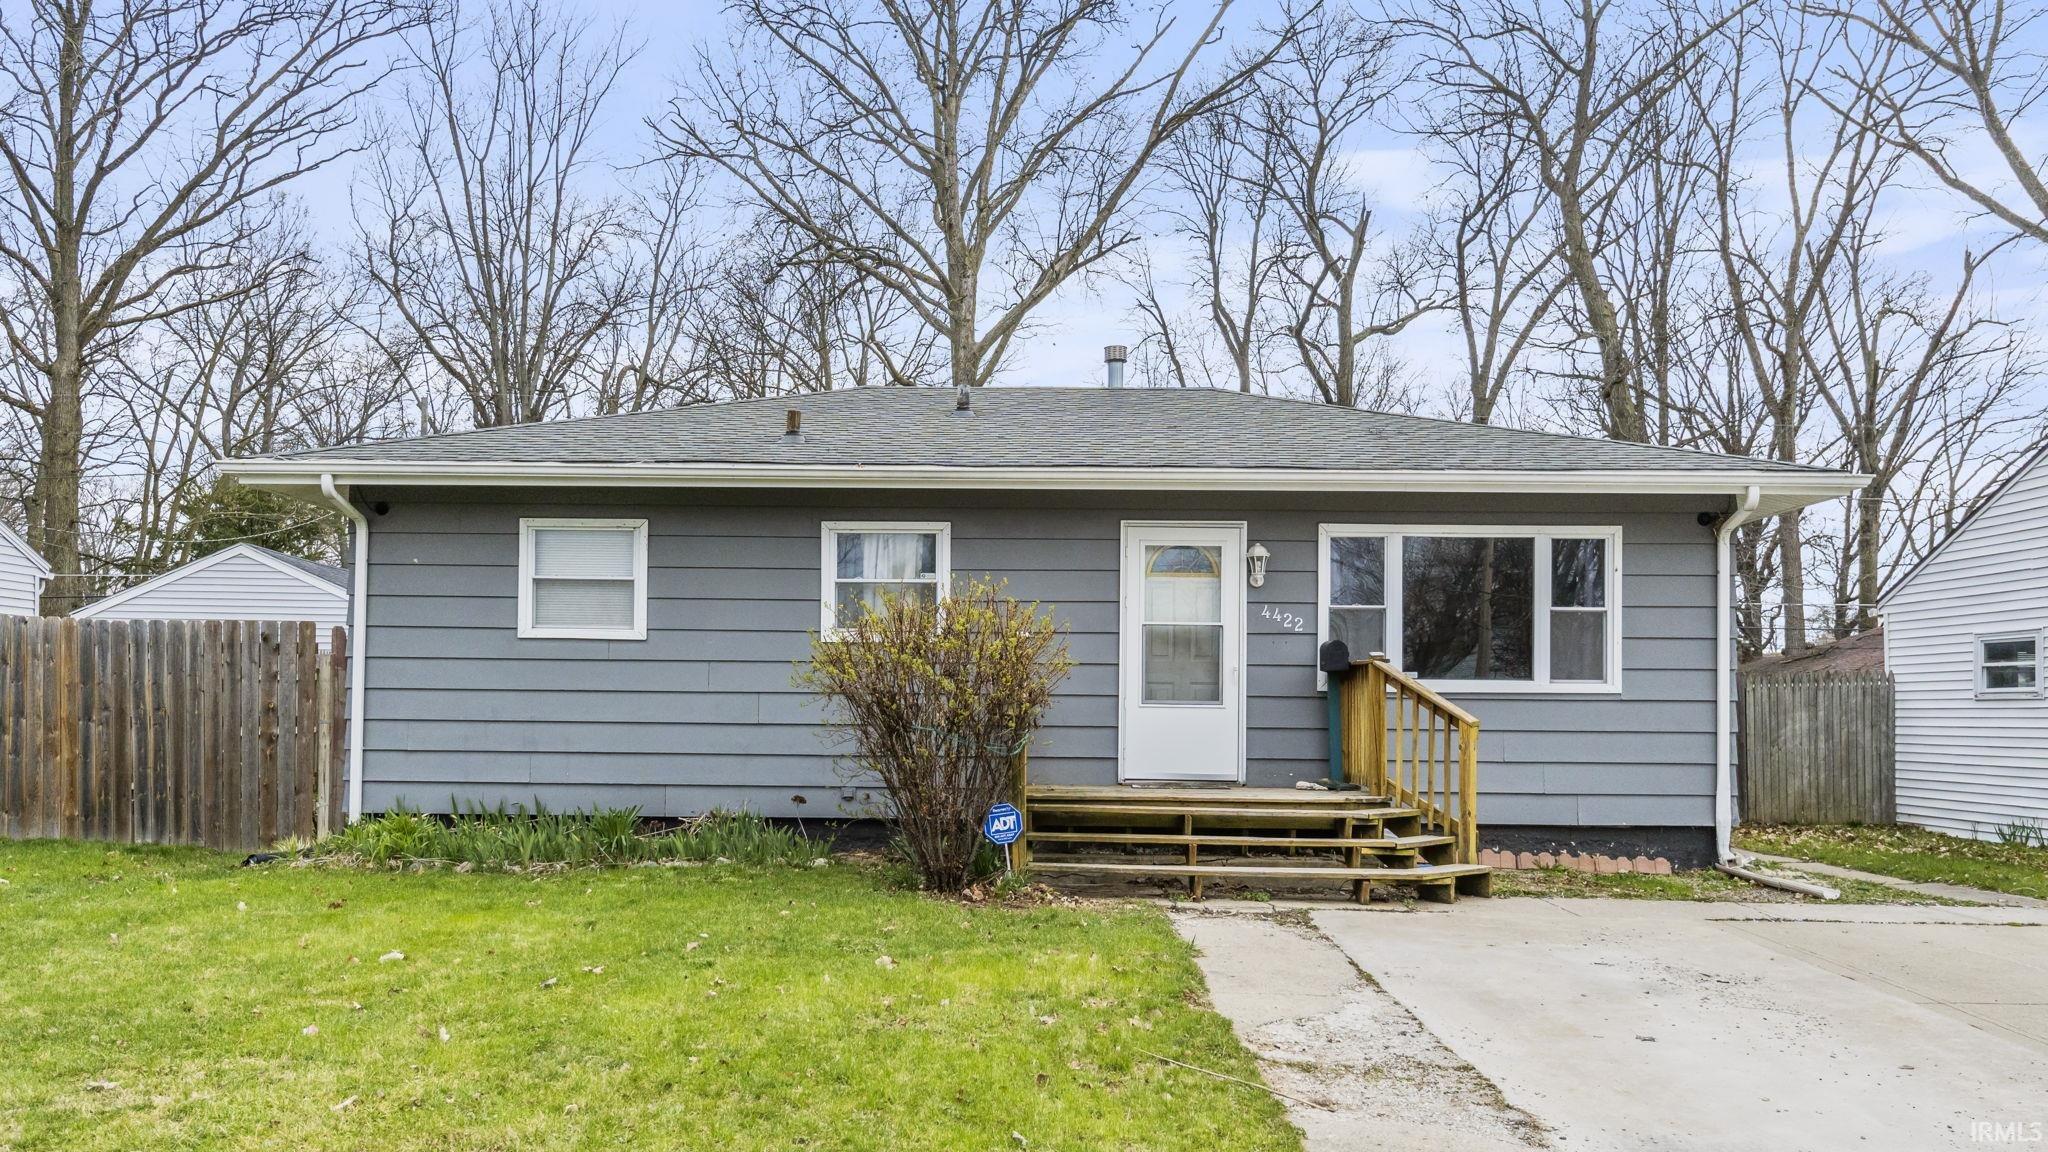 4422 Holton Avenue, Fort Wayne, IN 